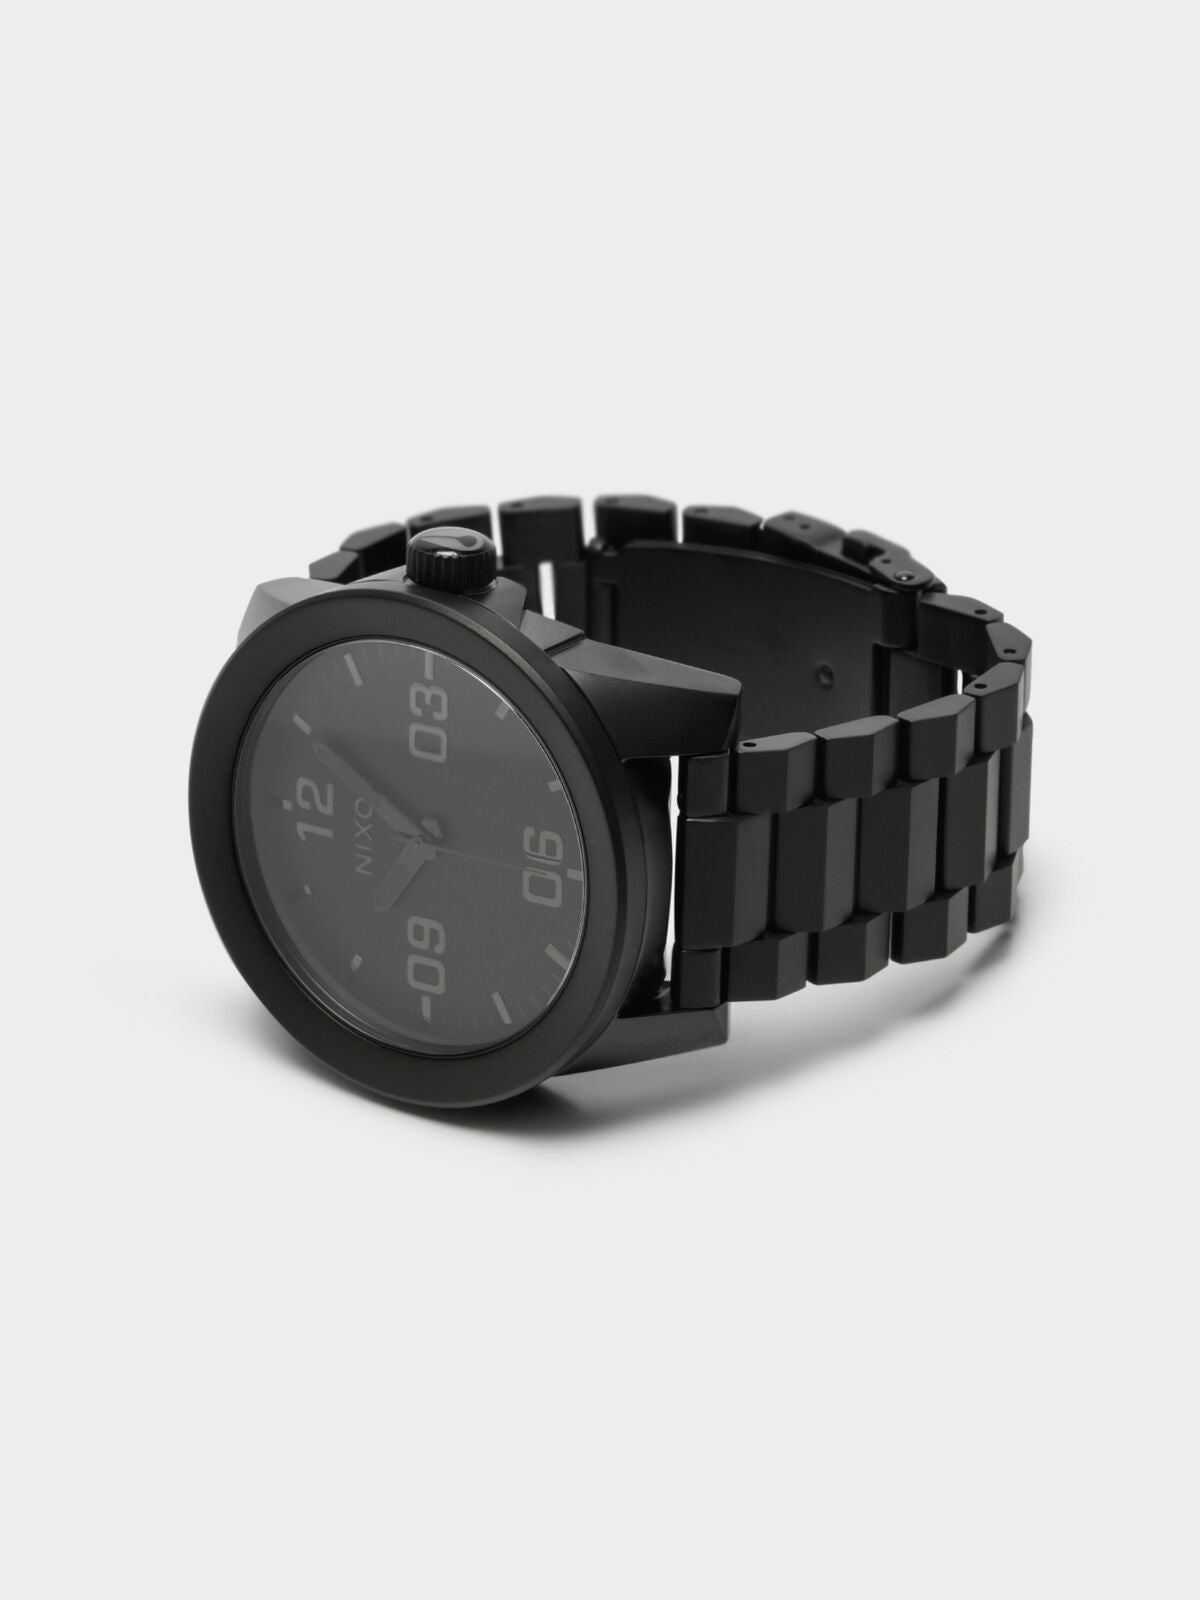 Coroporal 48mm Analogue Watch in Matte Black